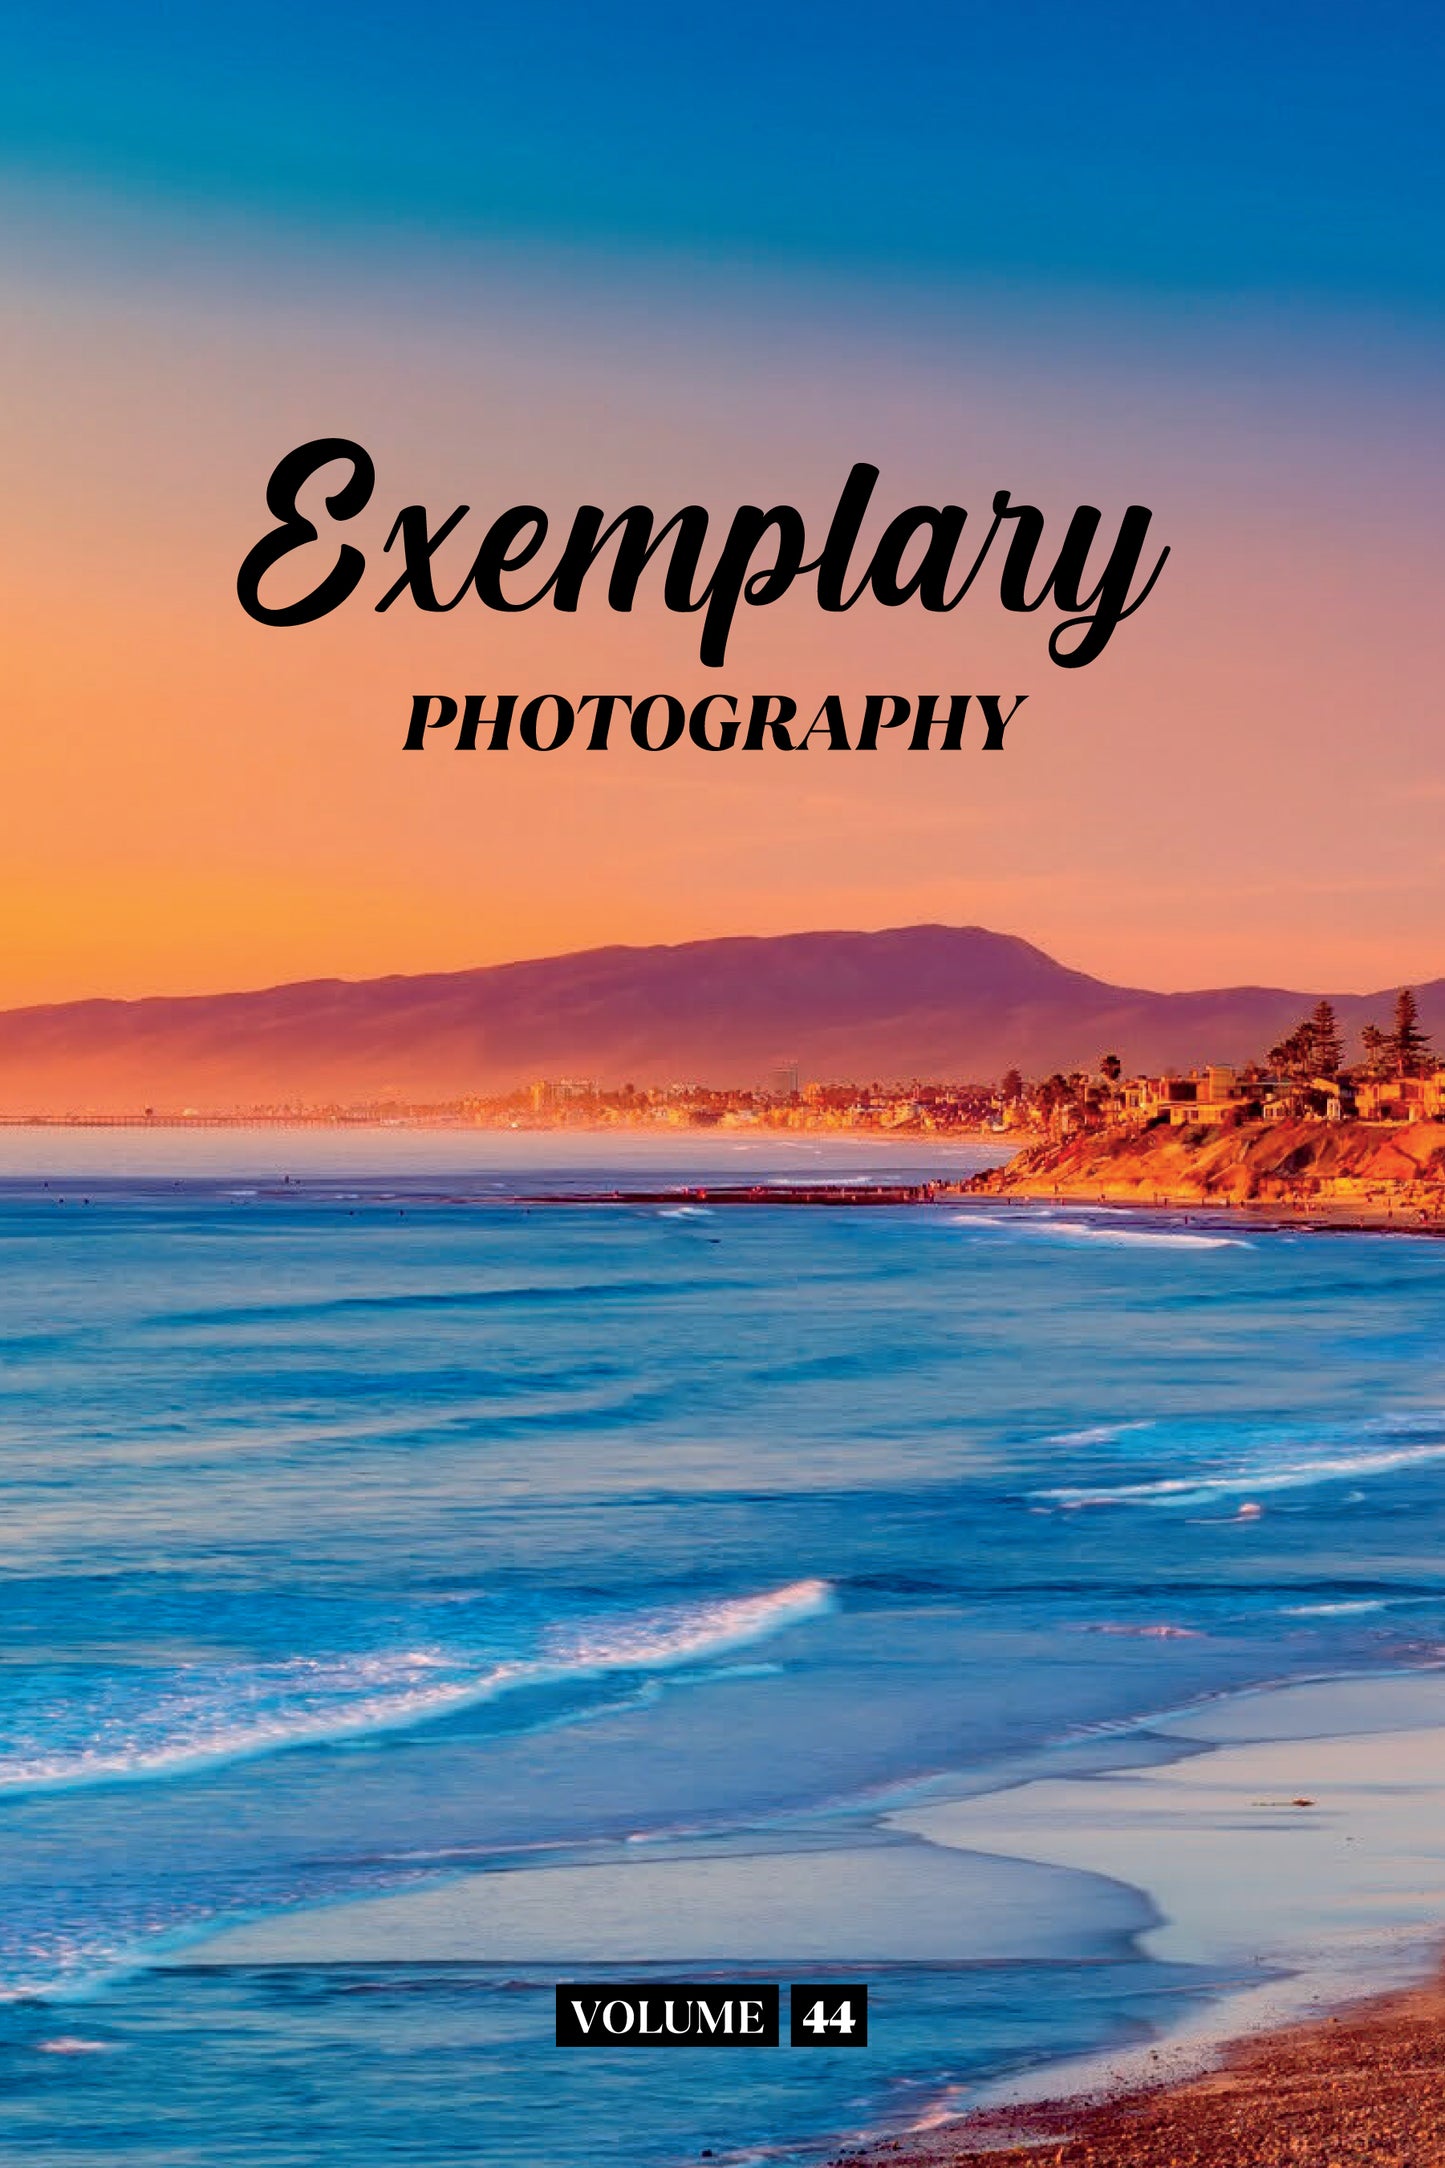 Exemplary Photography Volume 44 (Physical Book Pre-Order)